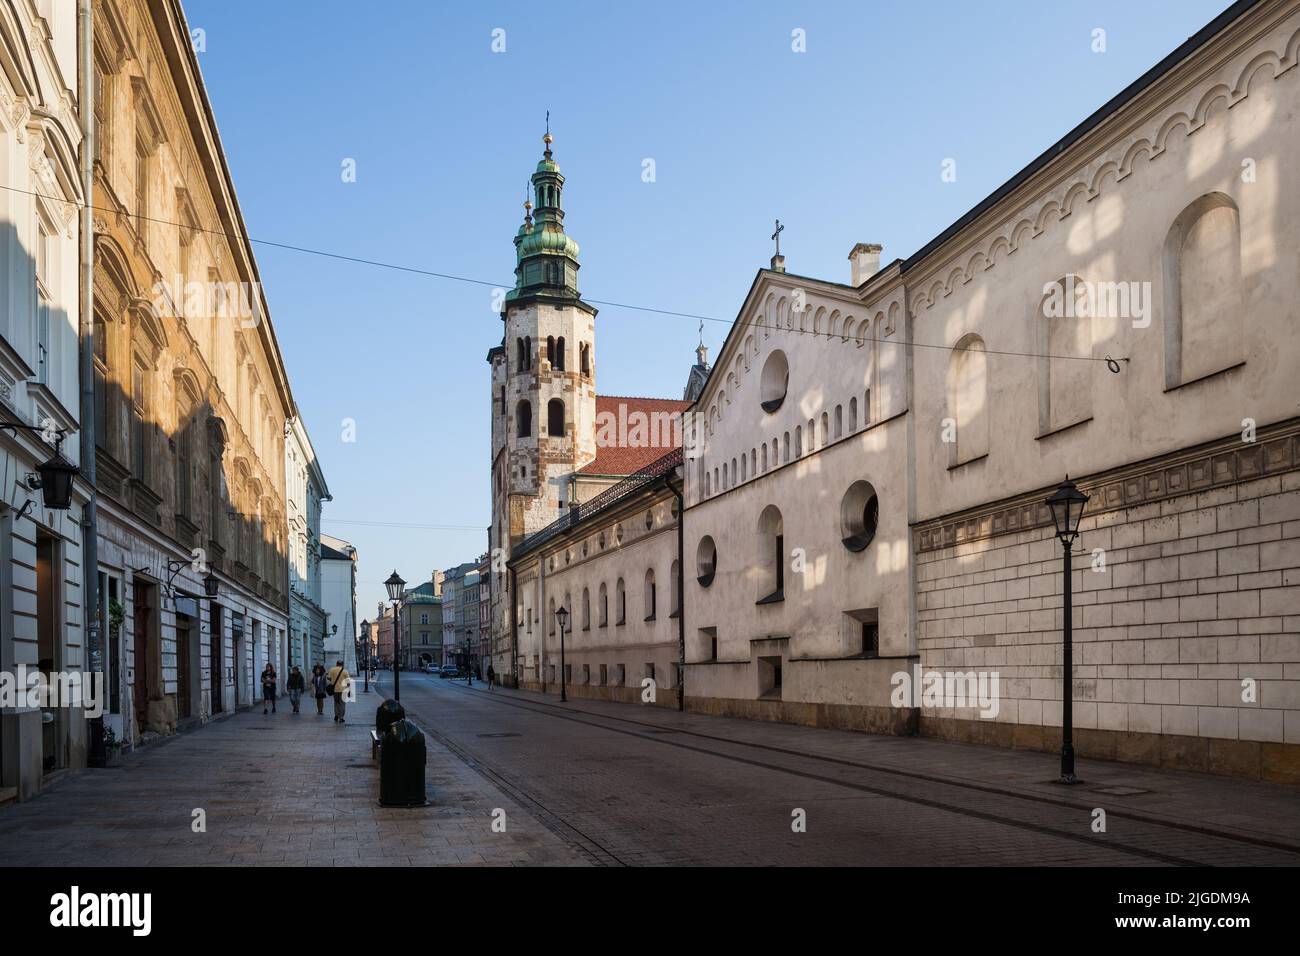 City of Krakow in Poland, Grodzka Street with Order of St. Clare Monastery and Church of Saint Andrew the Apostle. Stock Photo